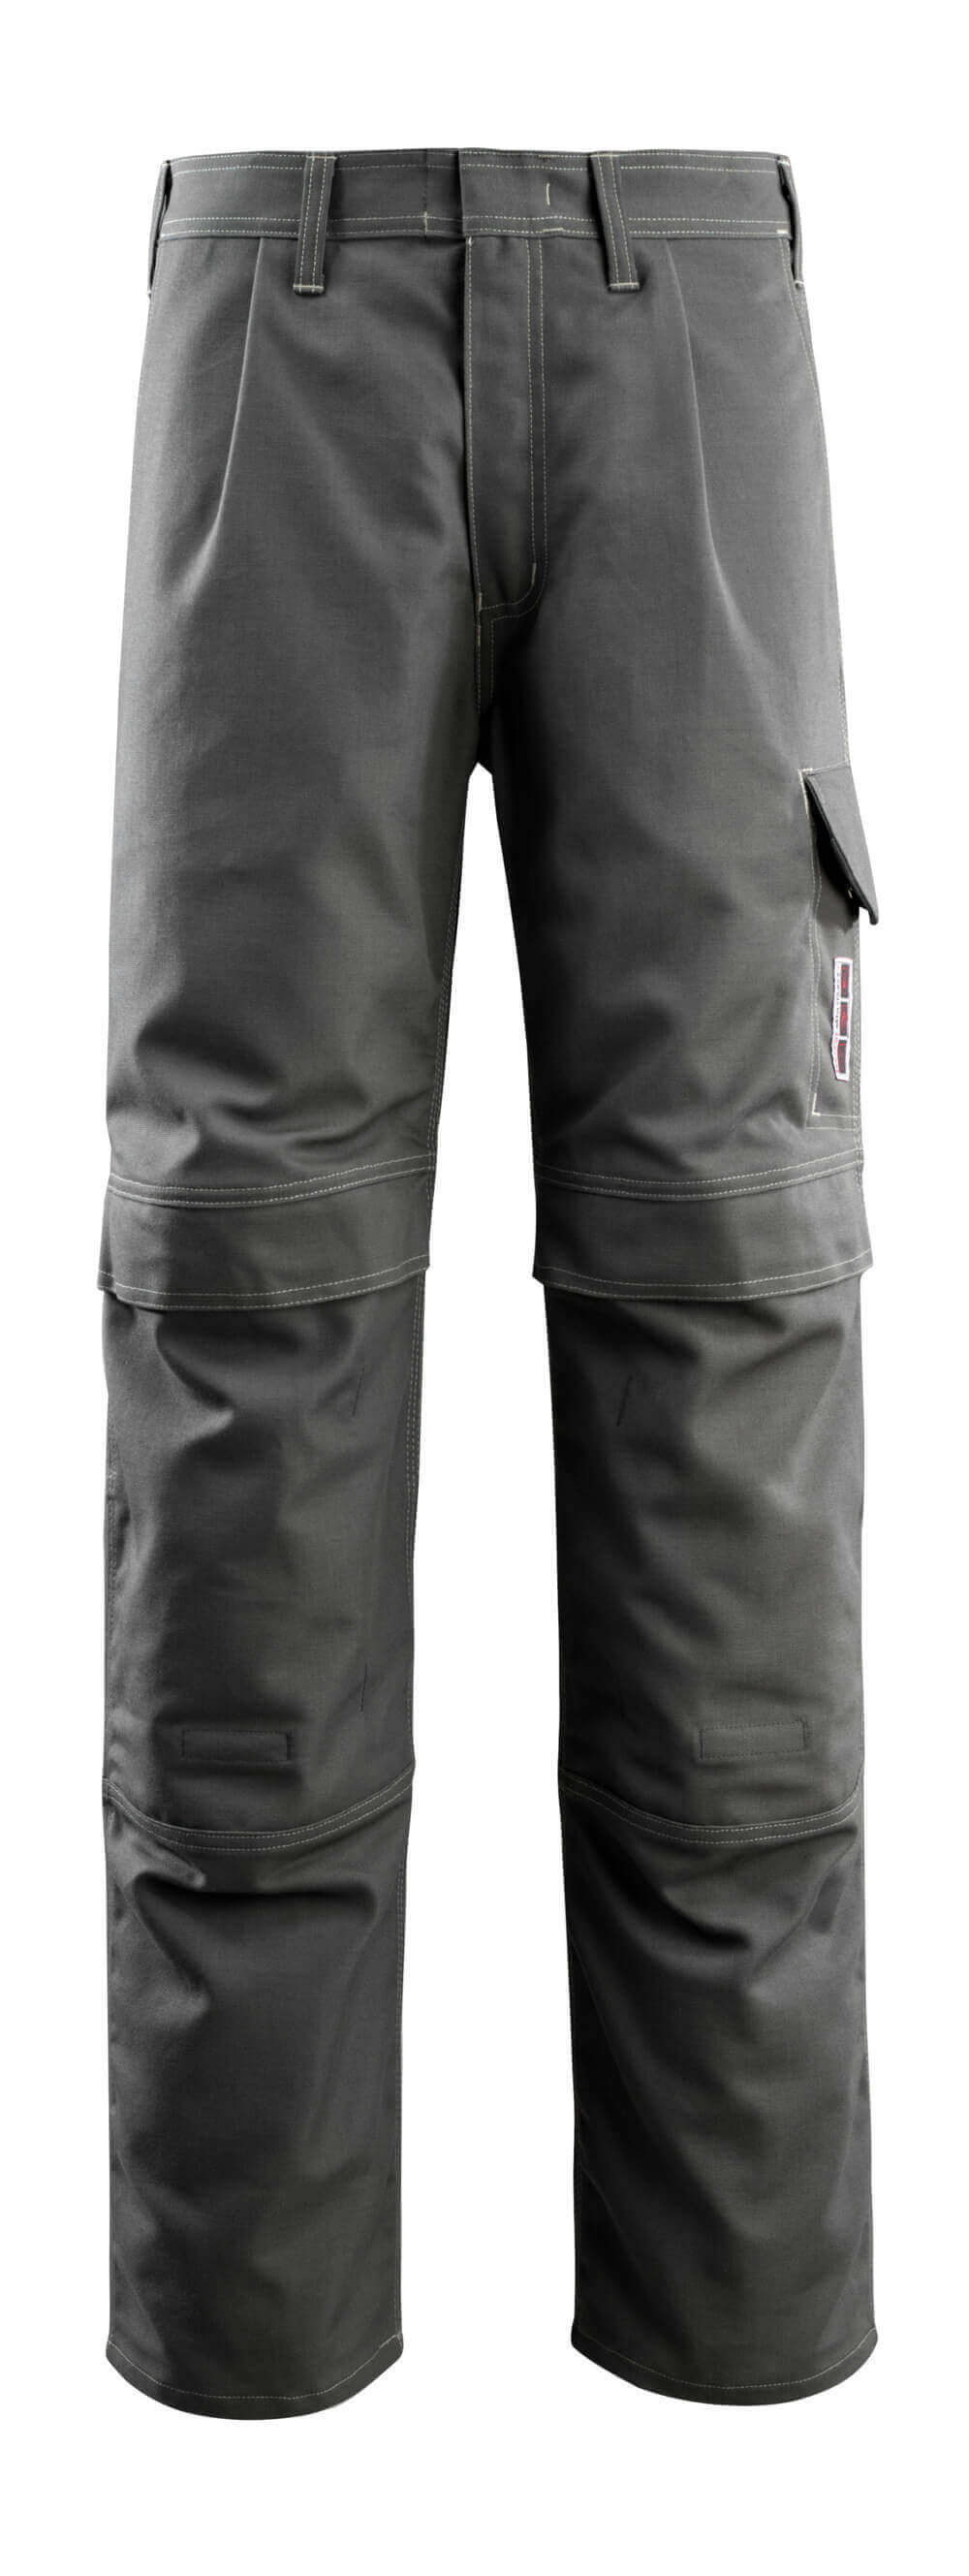 Mascot MULTISAFE  Bex Trousers with kneepad pockets 06679 dark anthracite